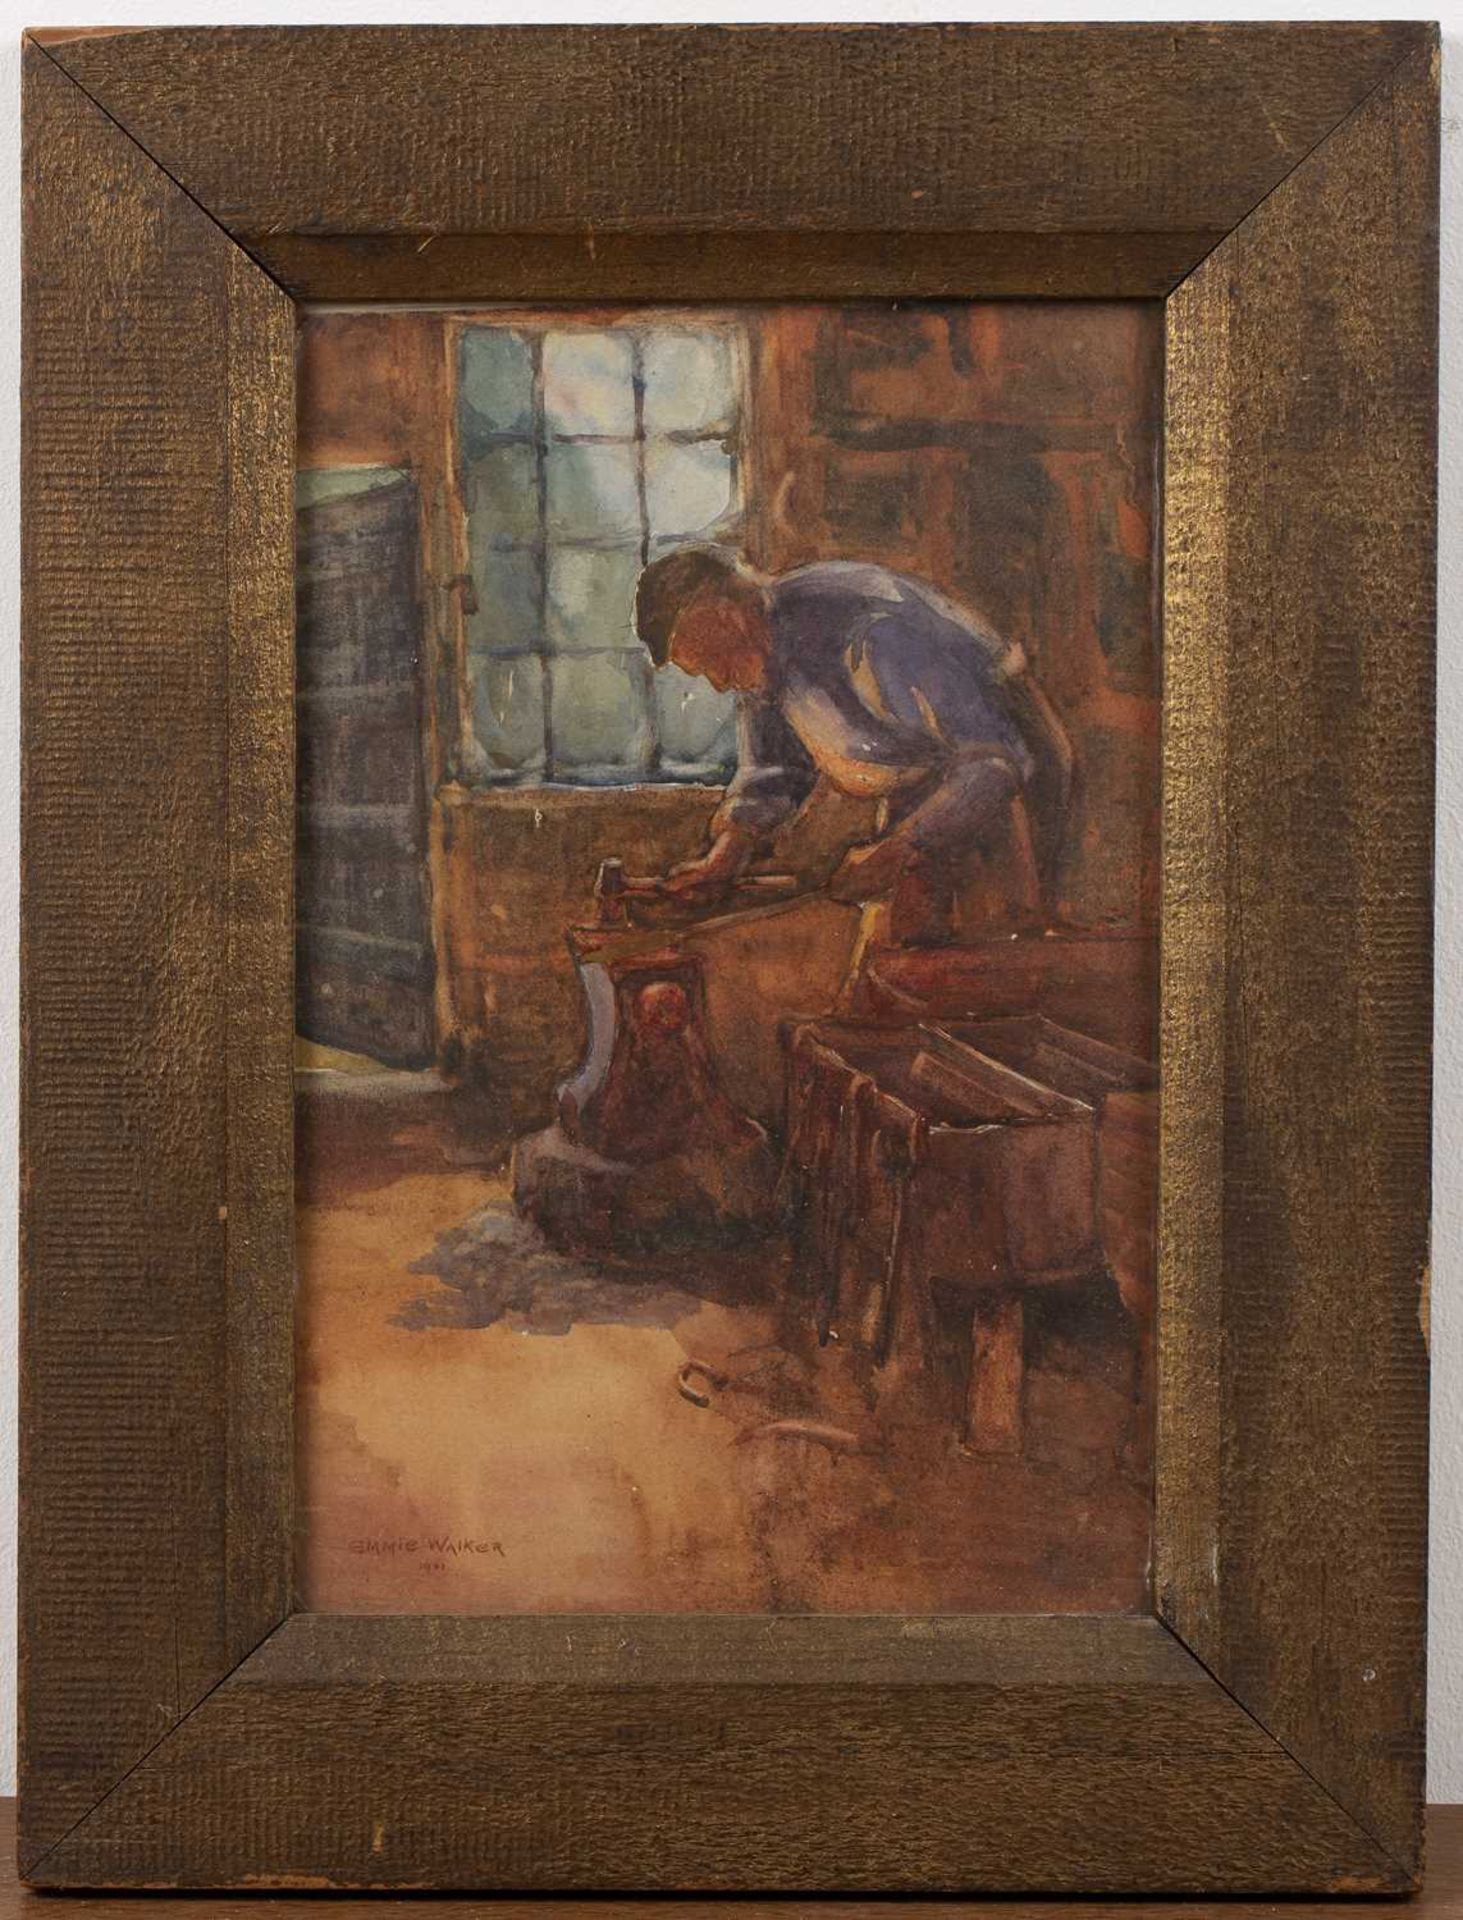 Emmie Walker (20th Century School) 'Untitled blacksmith at work', watercolour, signed and dated 1901 - Image 2 of 3